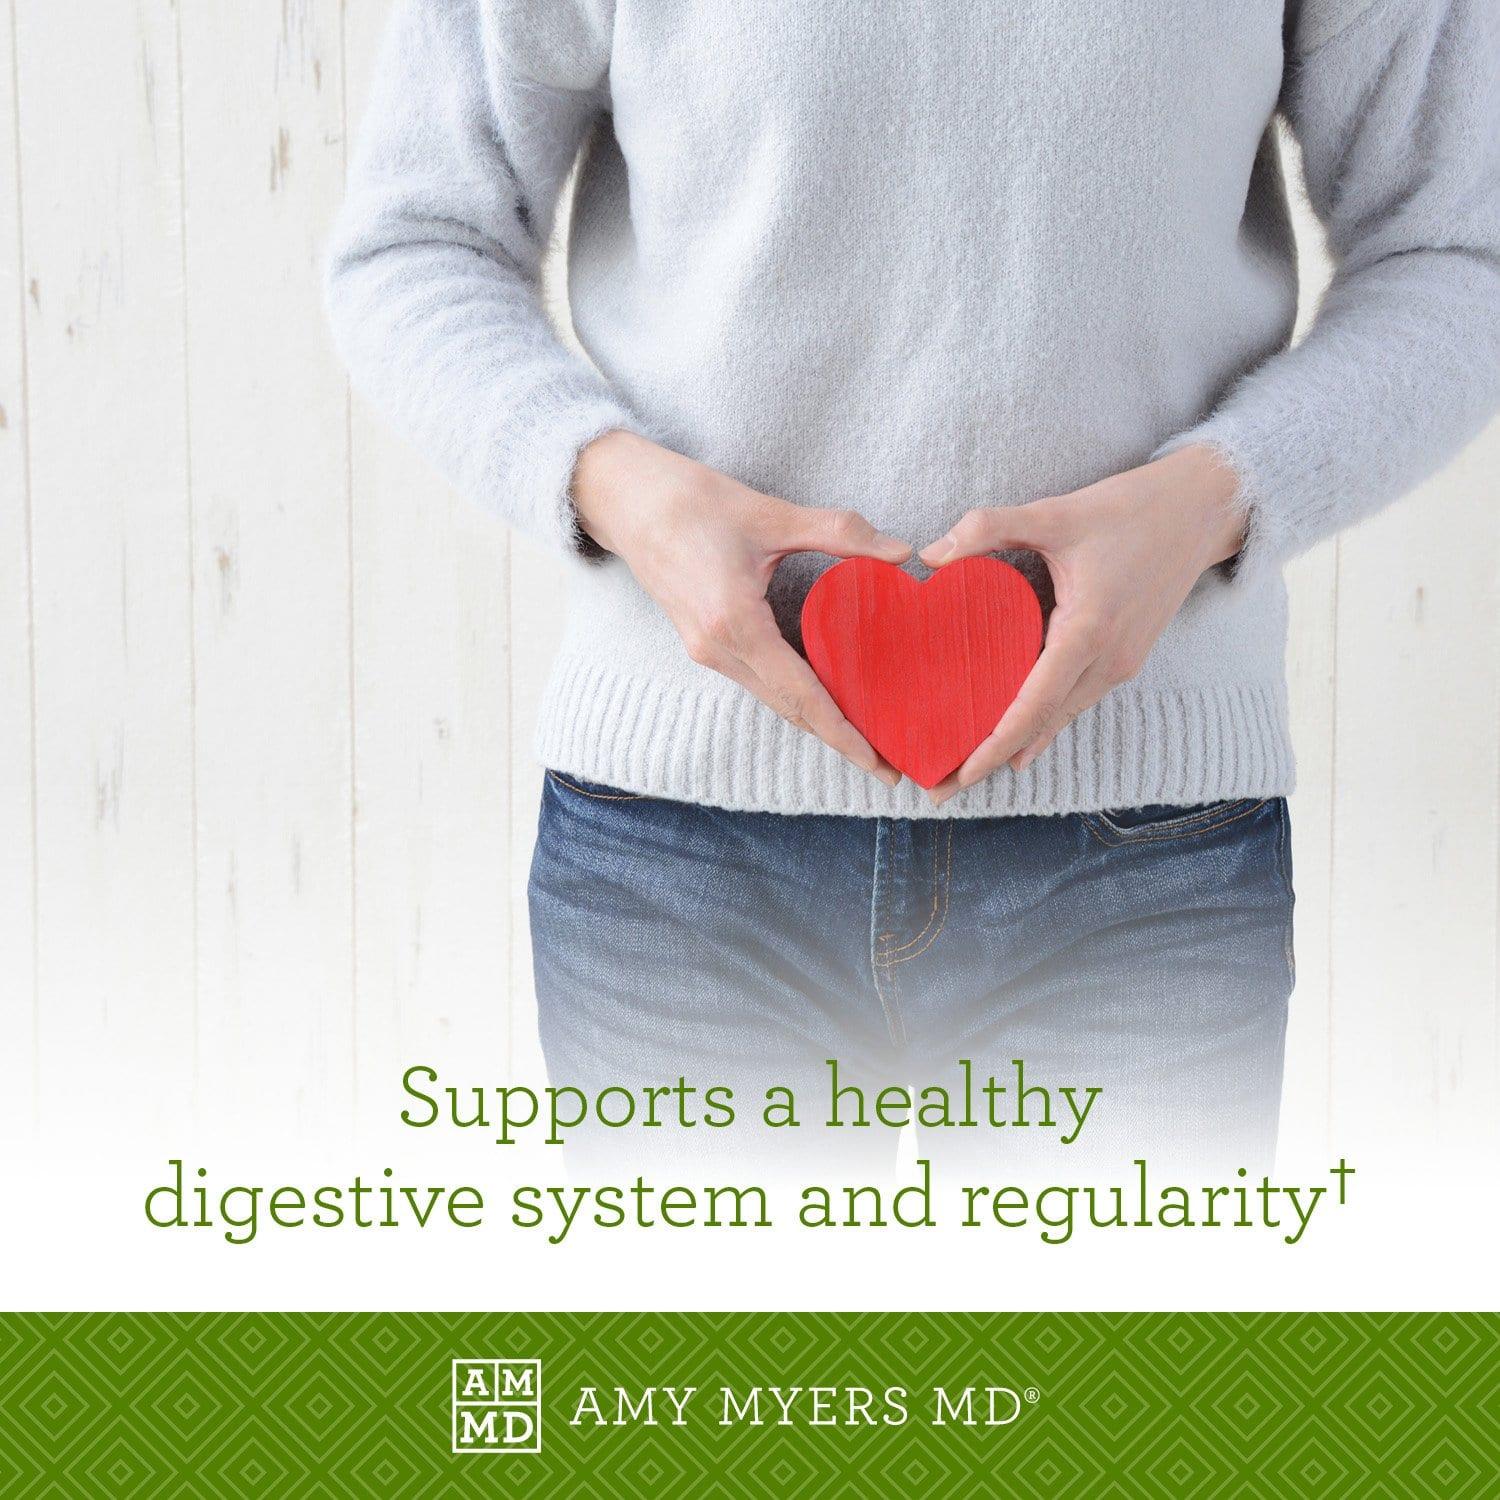 Woman holding a heart - Primal Earth™ Probiotic supports a healthy digestive system and reglarity - Amy Myers MD®